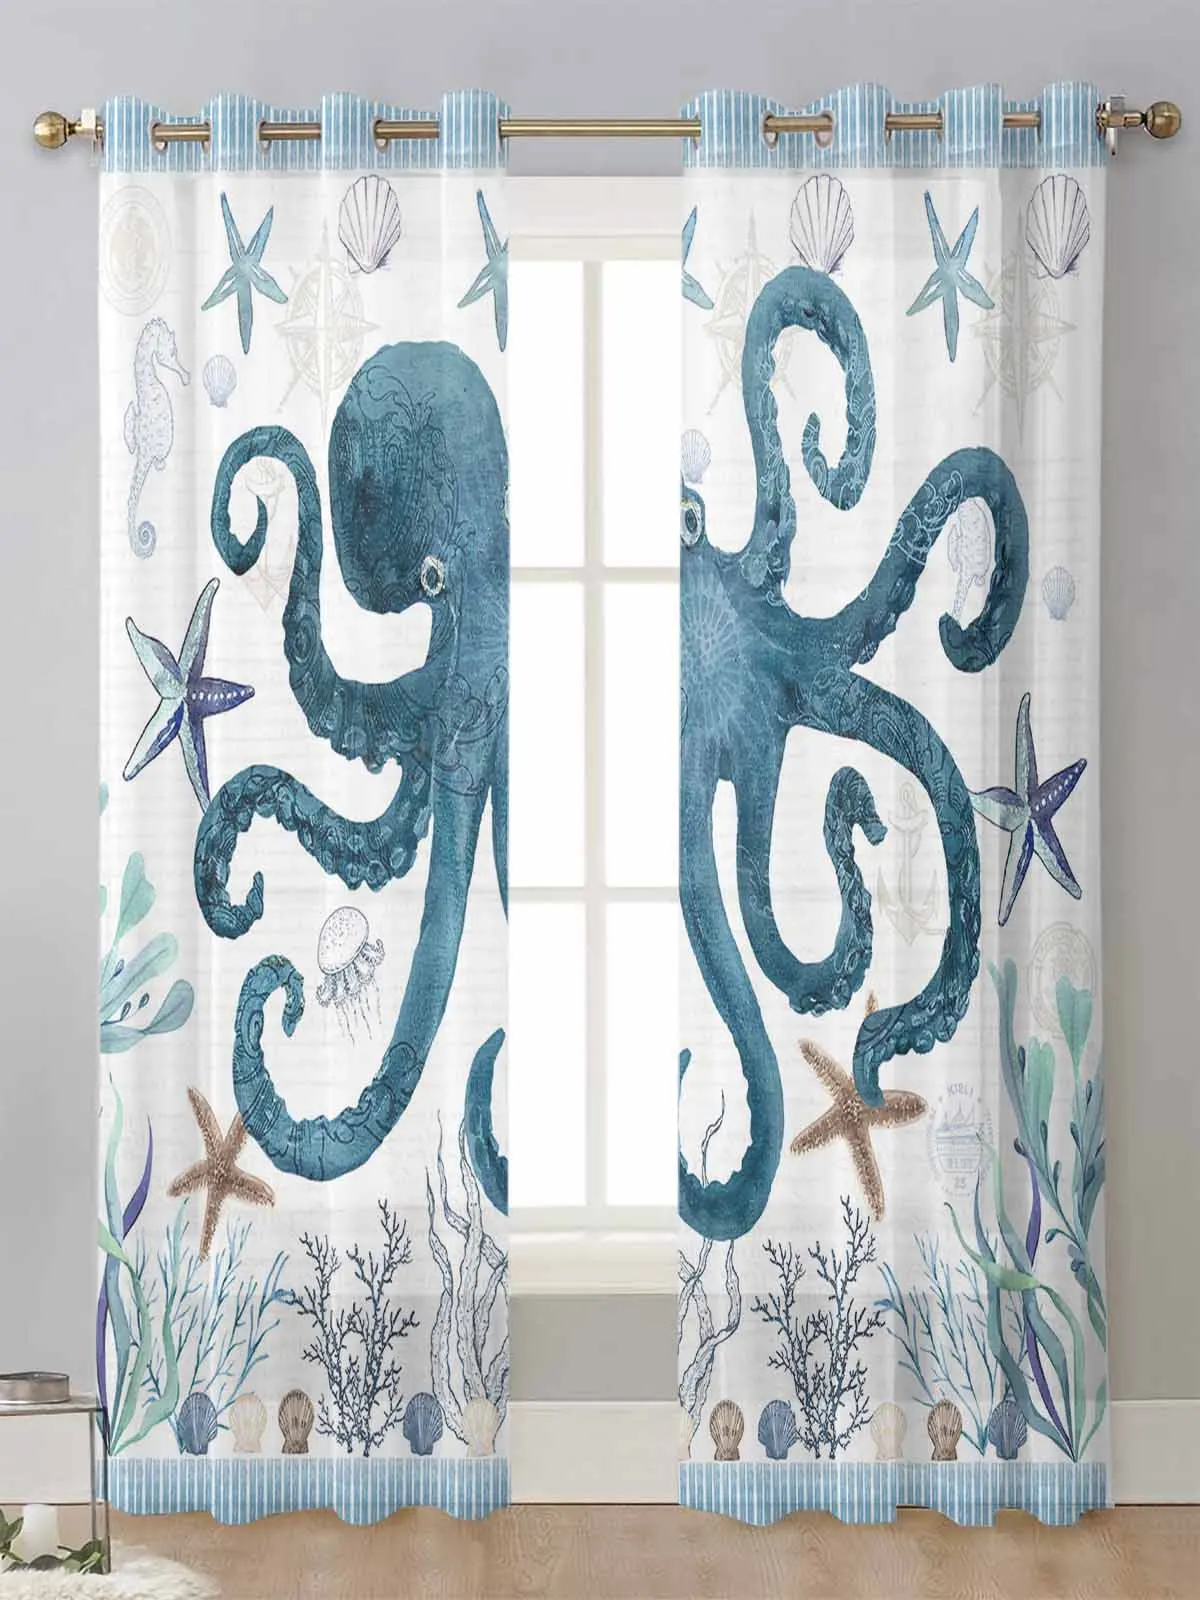 

Mediterranean Style Ocean Stripes Starfish Octopus Sheer Curtains Living Room Window Voile Tulle Curtain Drapes Home Decor